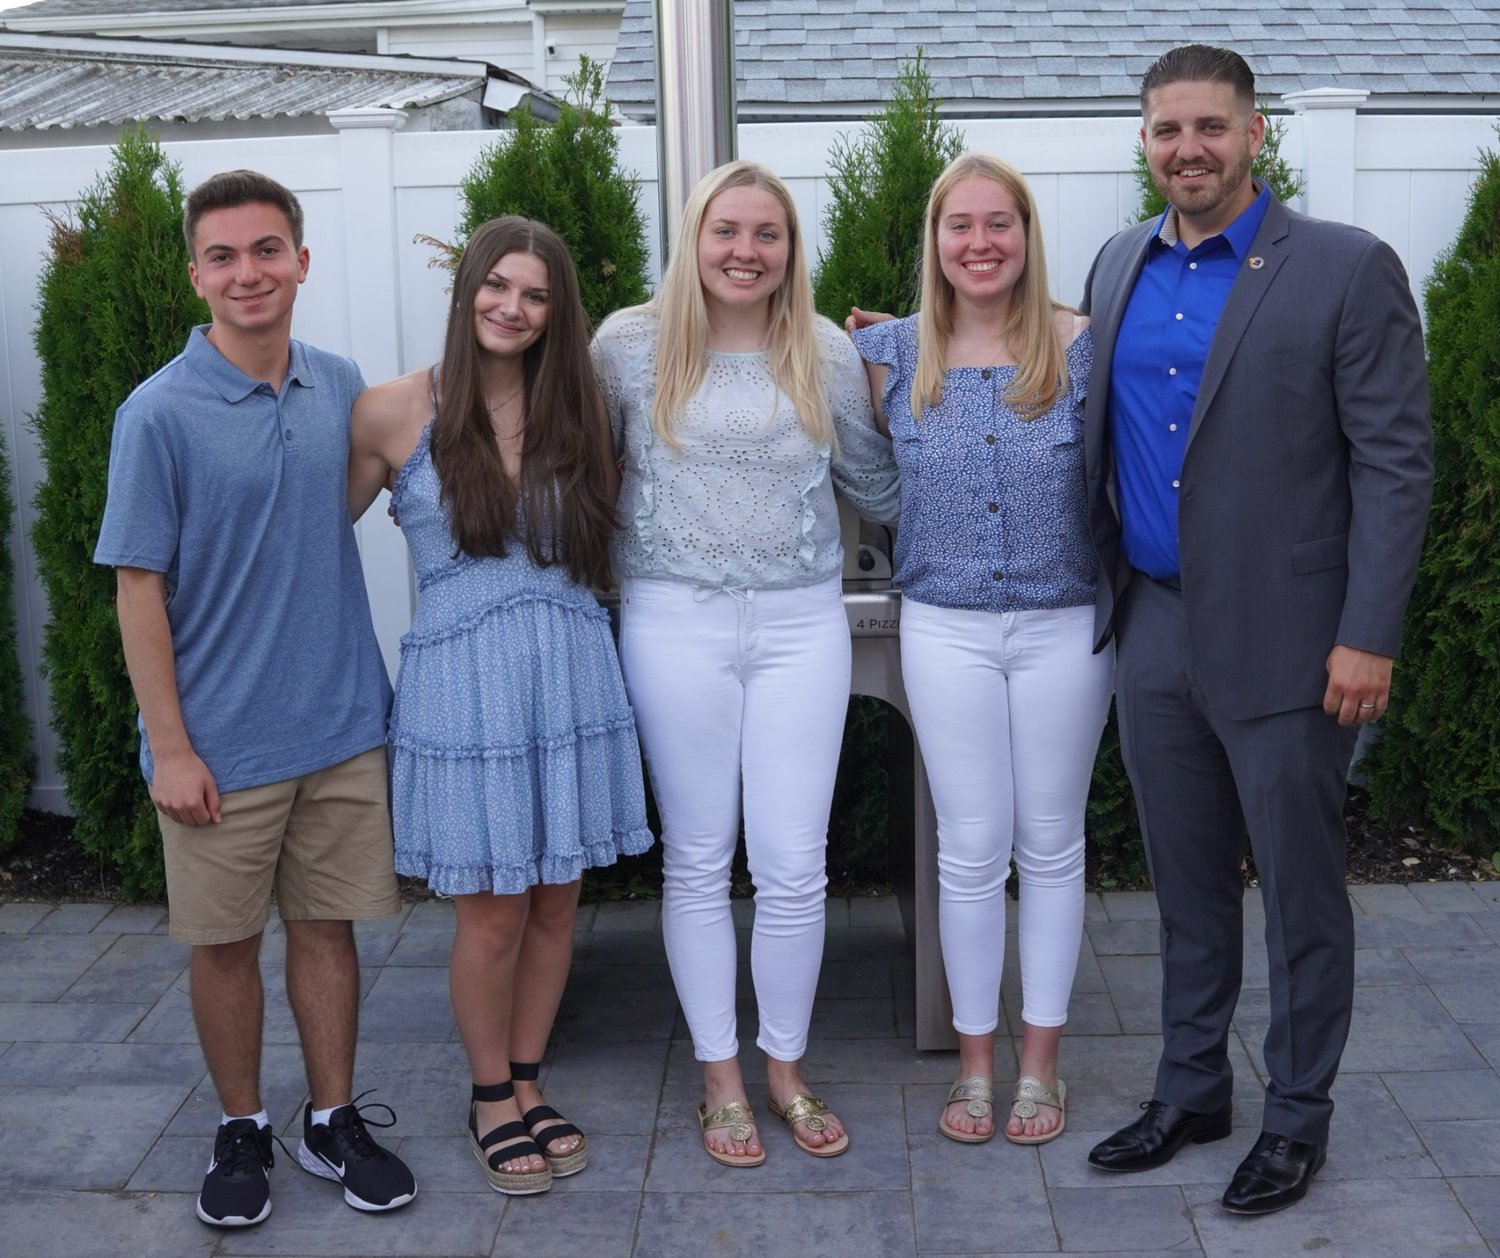 From left, Christopher Ignatiou, Victoria Buffolino, Ella Noonan, and Brooke Noonan were awarded scholarships from Chamber President Richie Krug Jr.